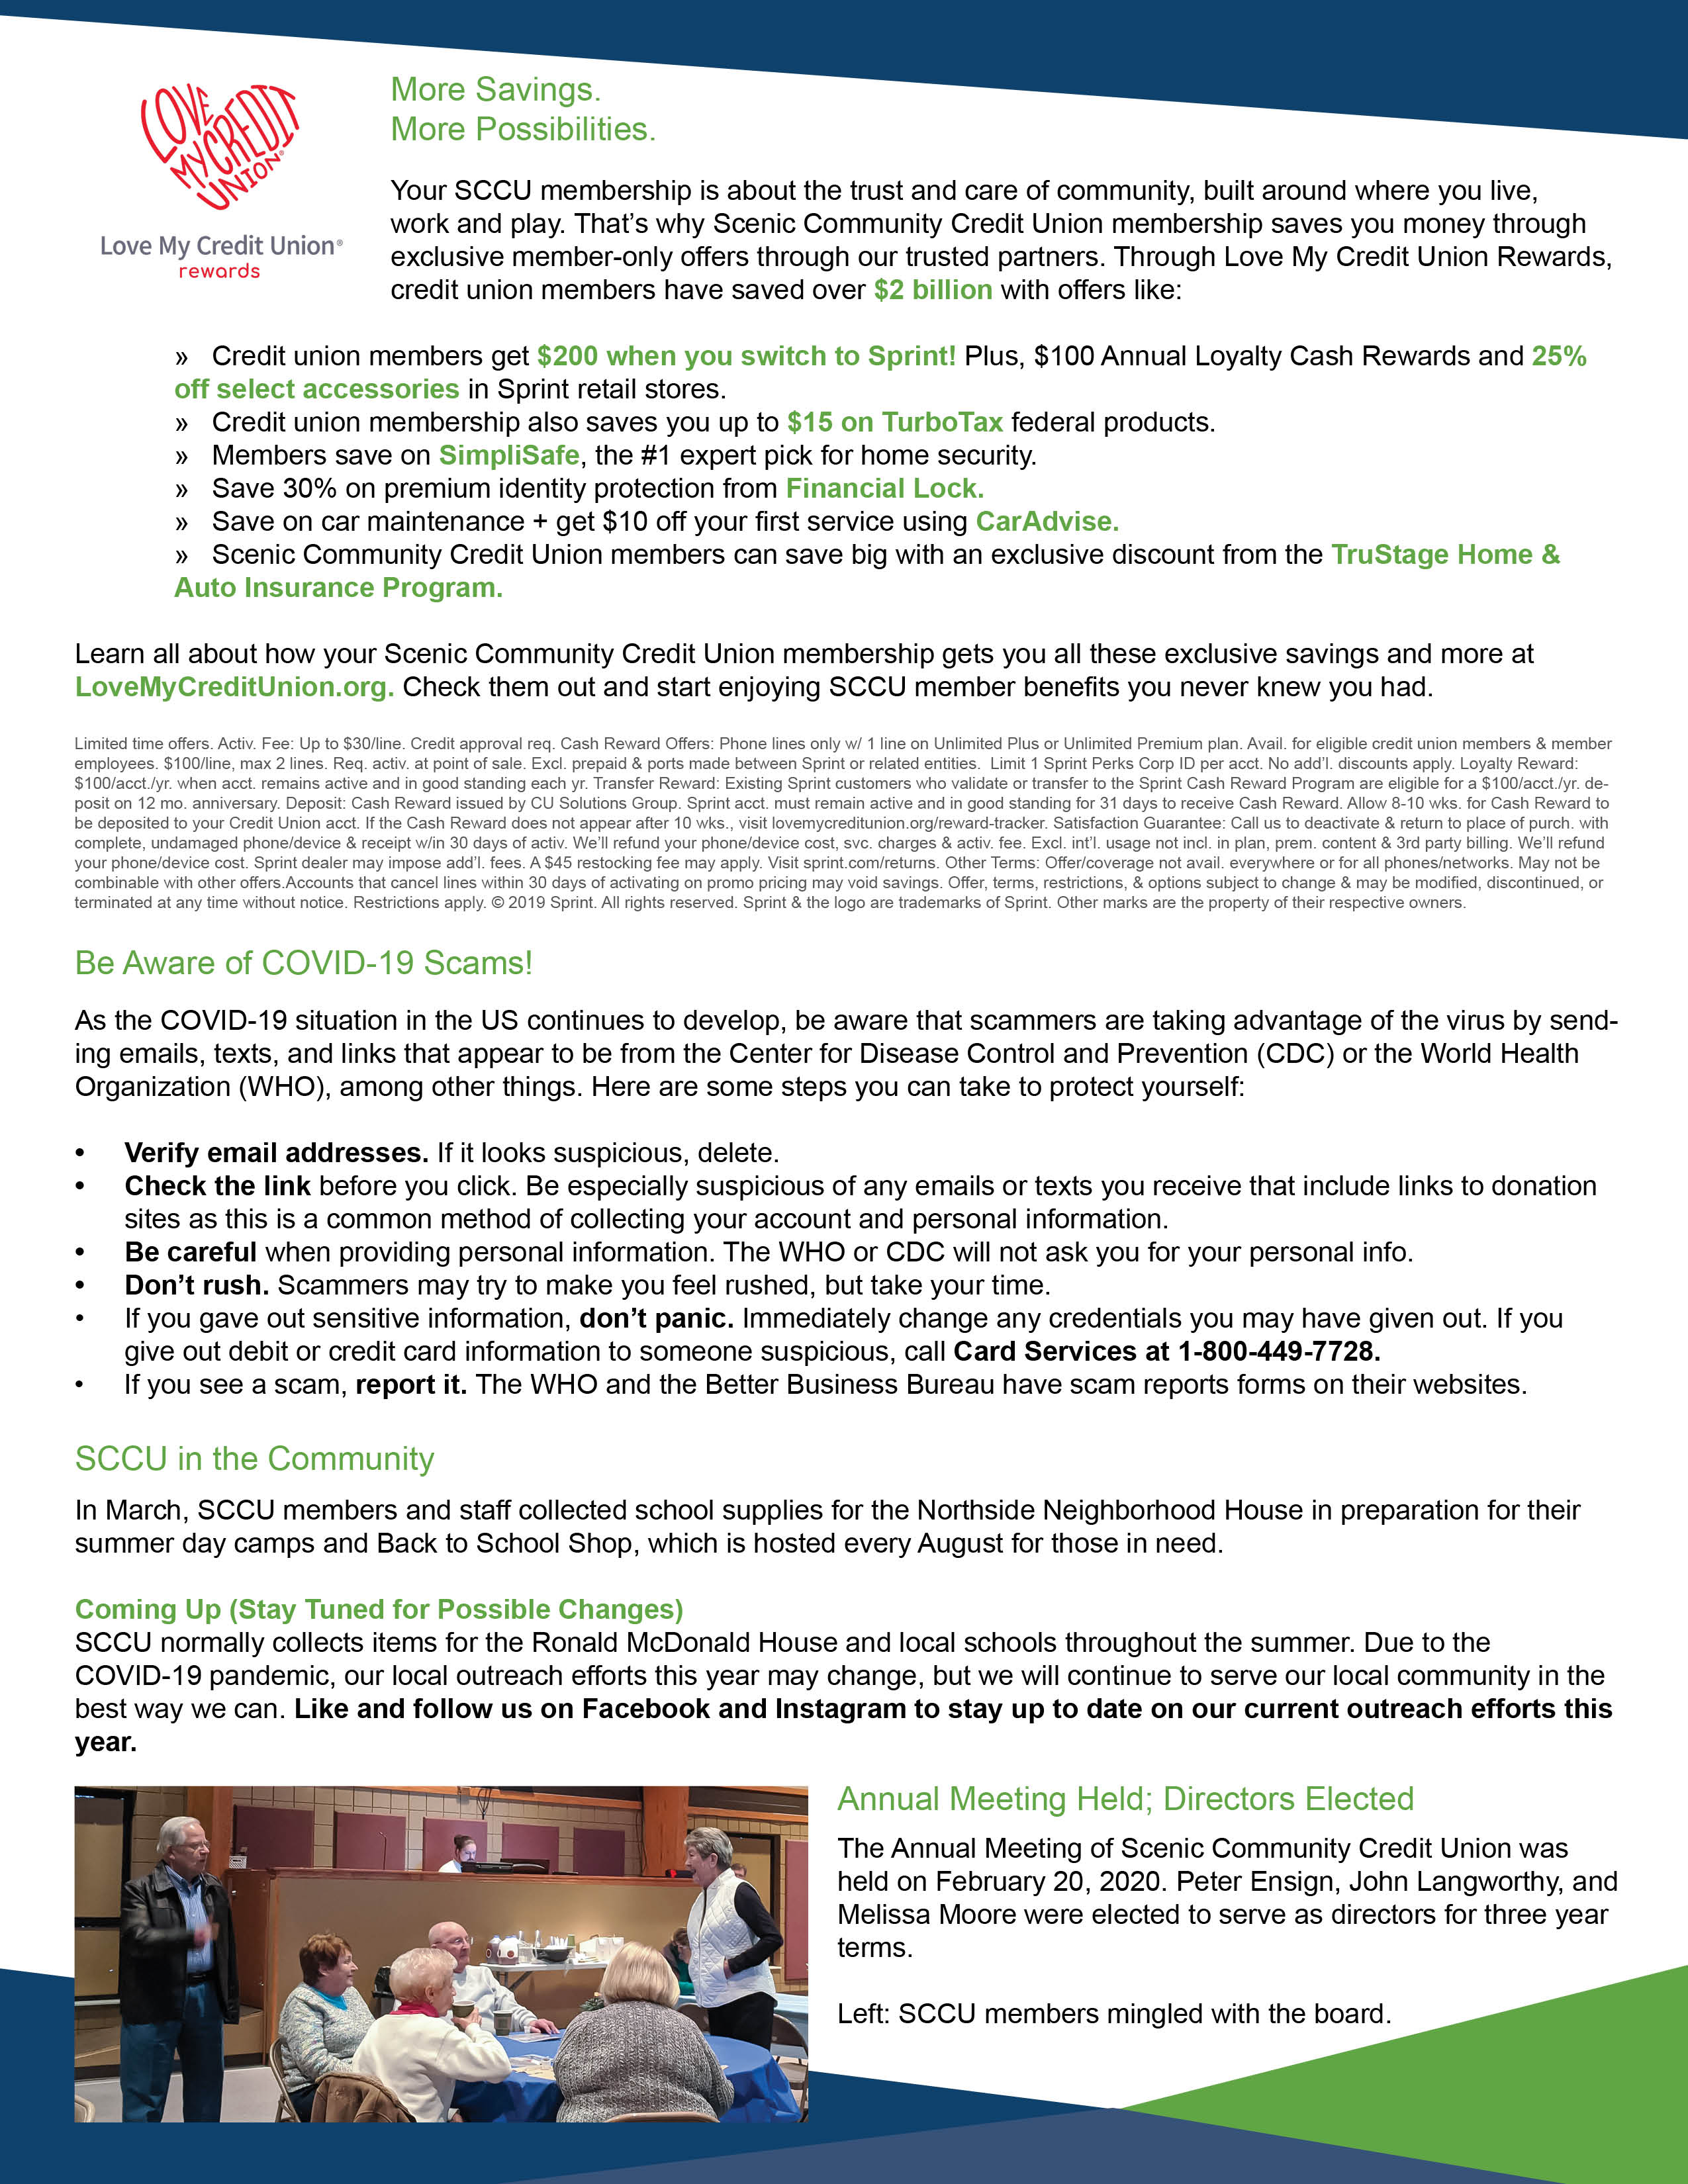 April 2020 newsletter page 2.